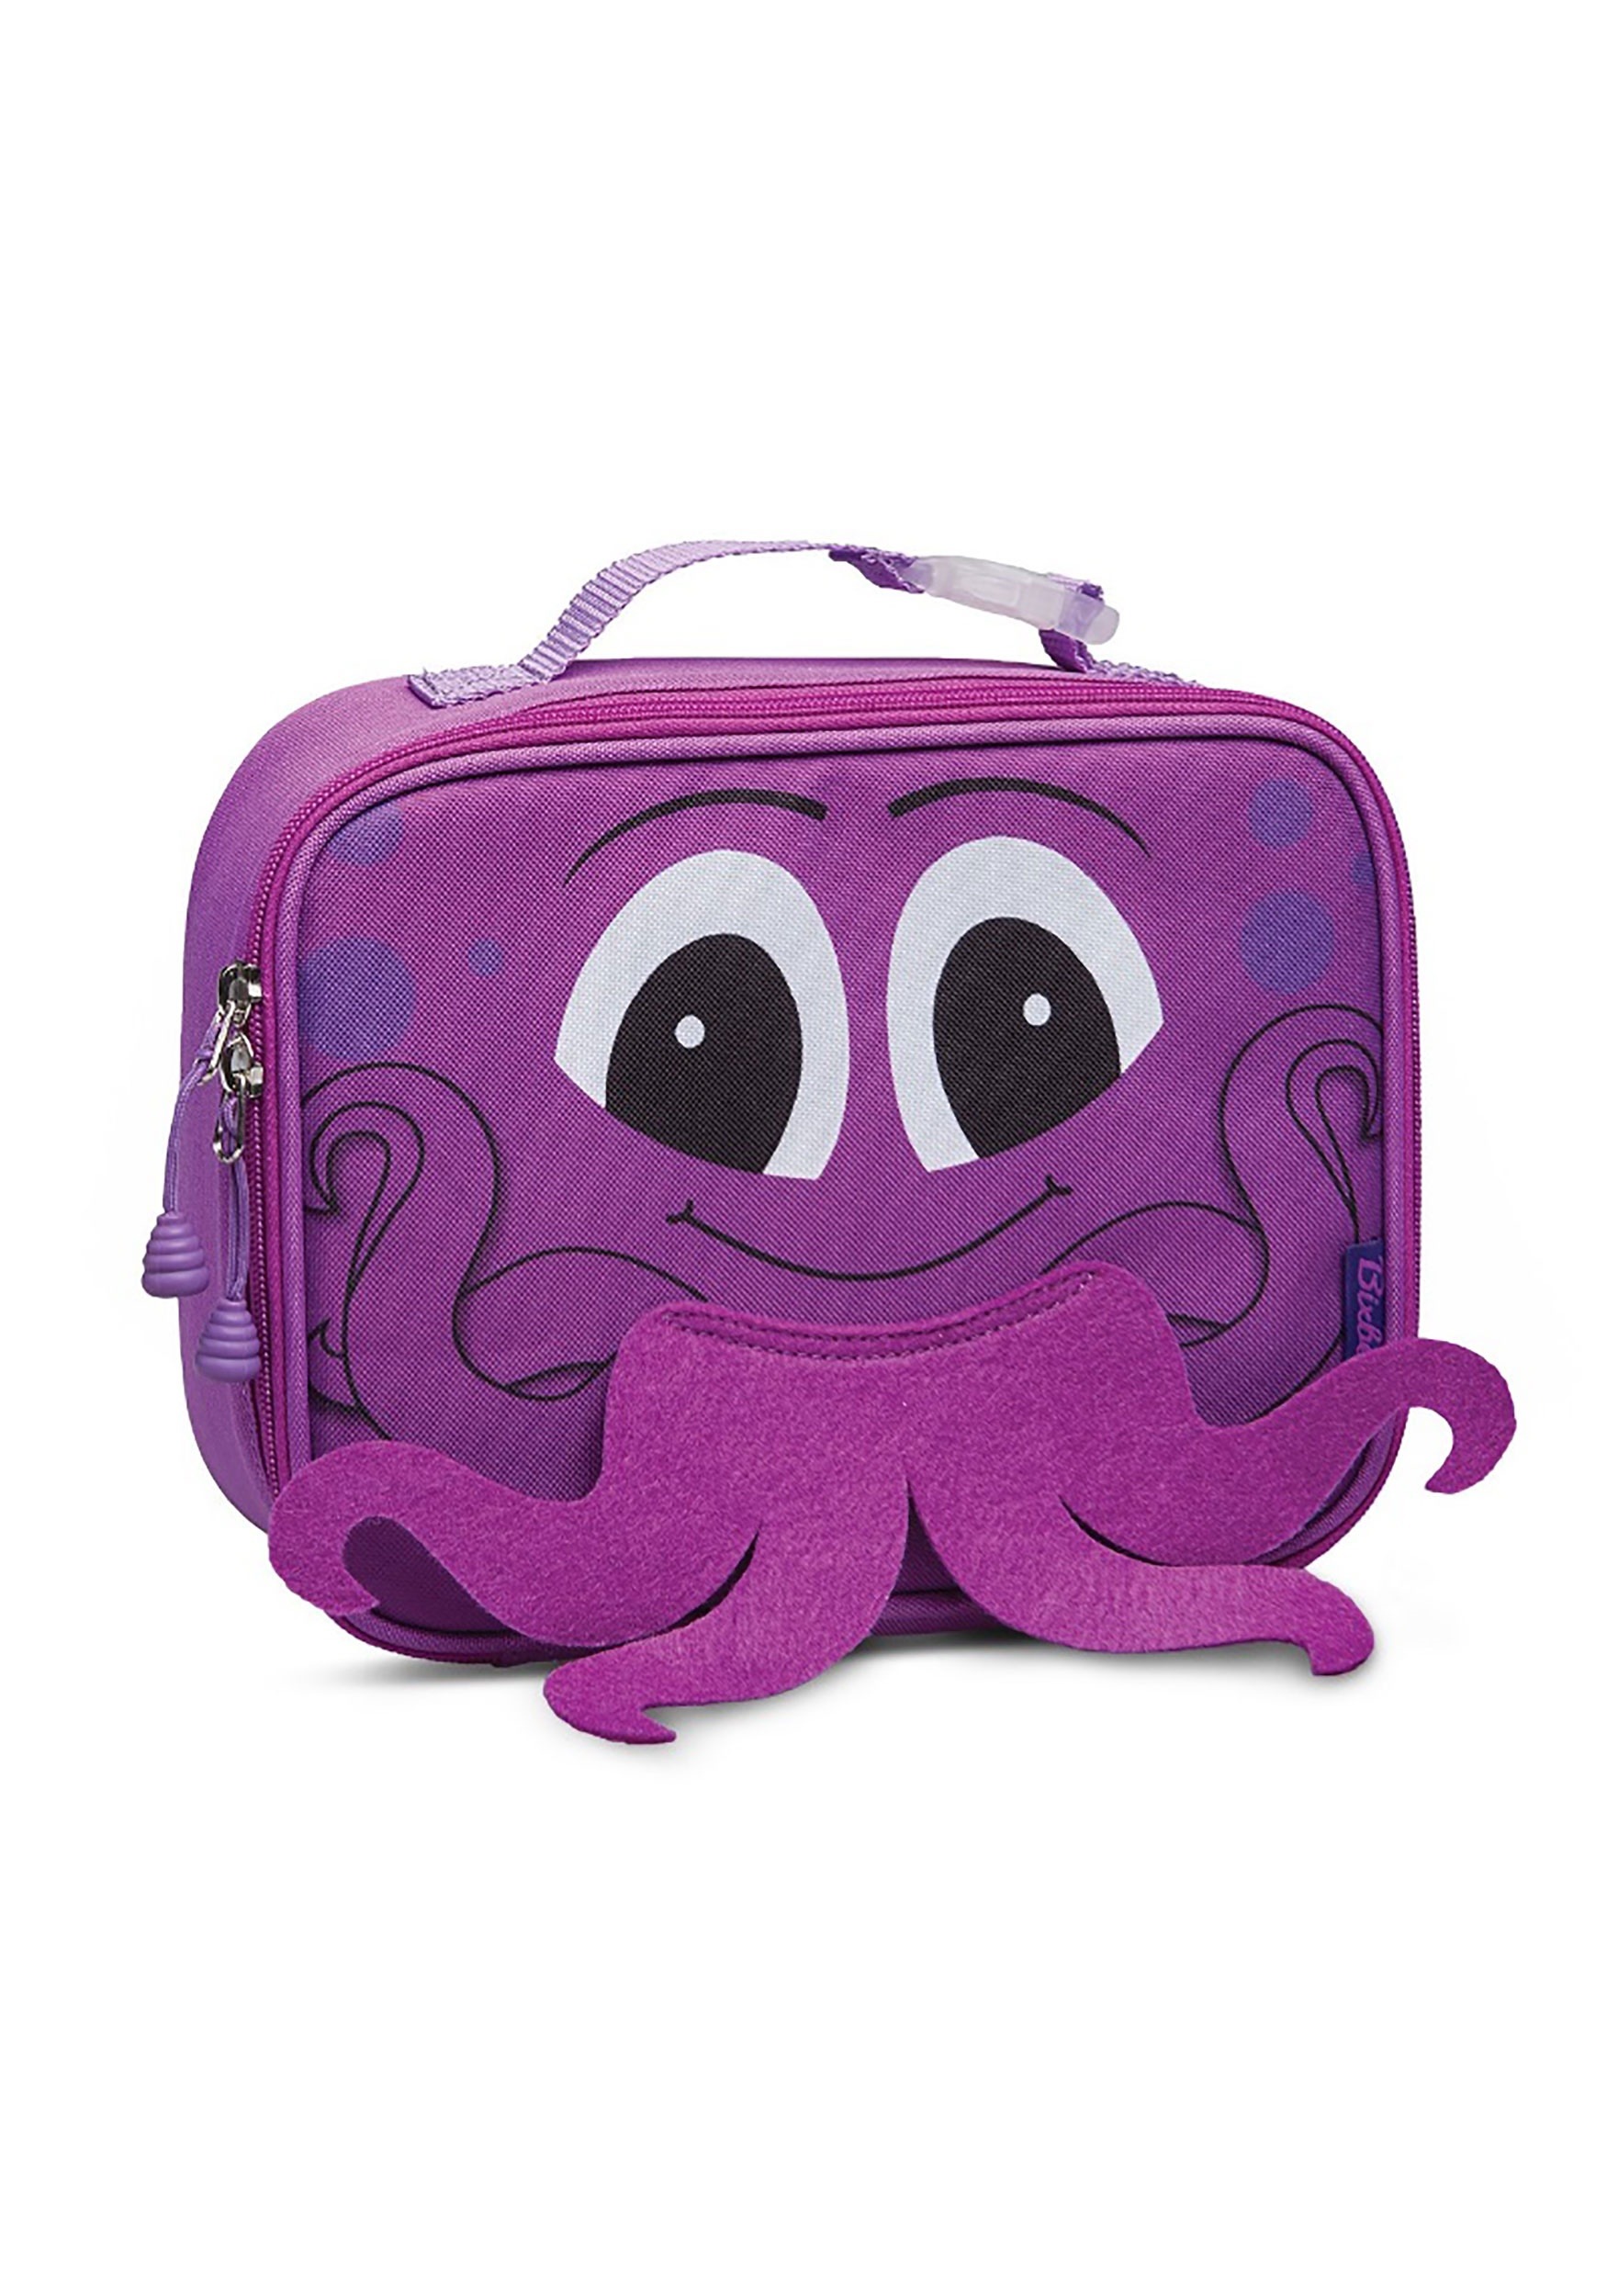 Octopus Lunch Box for Kids